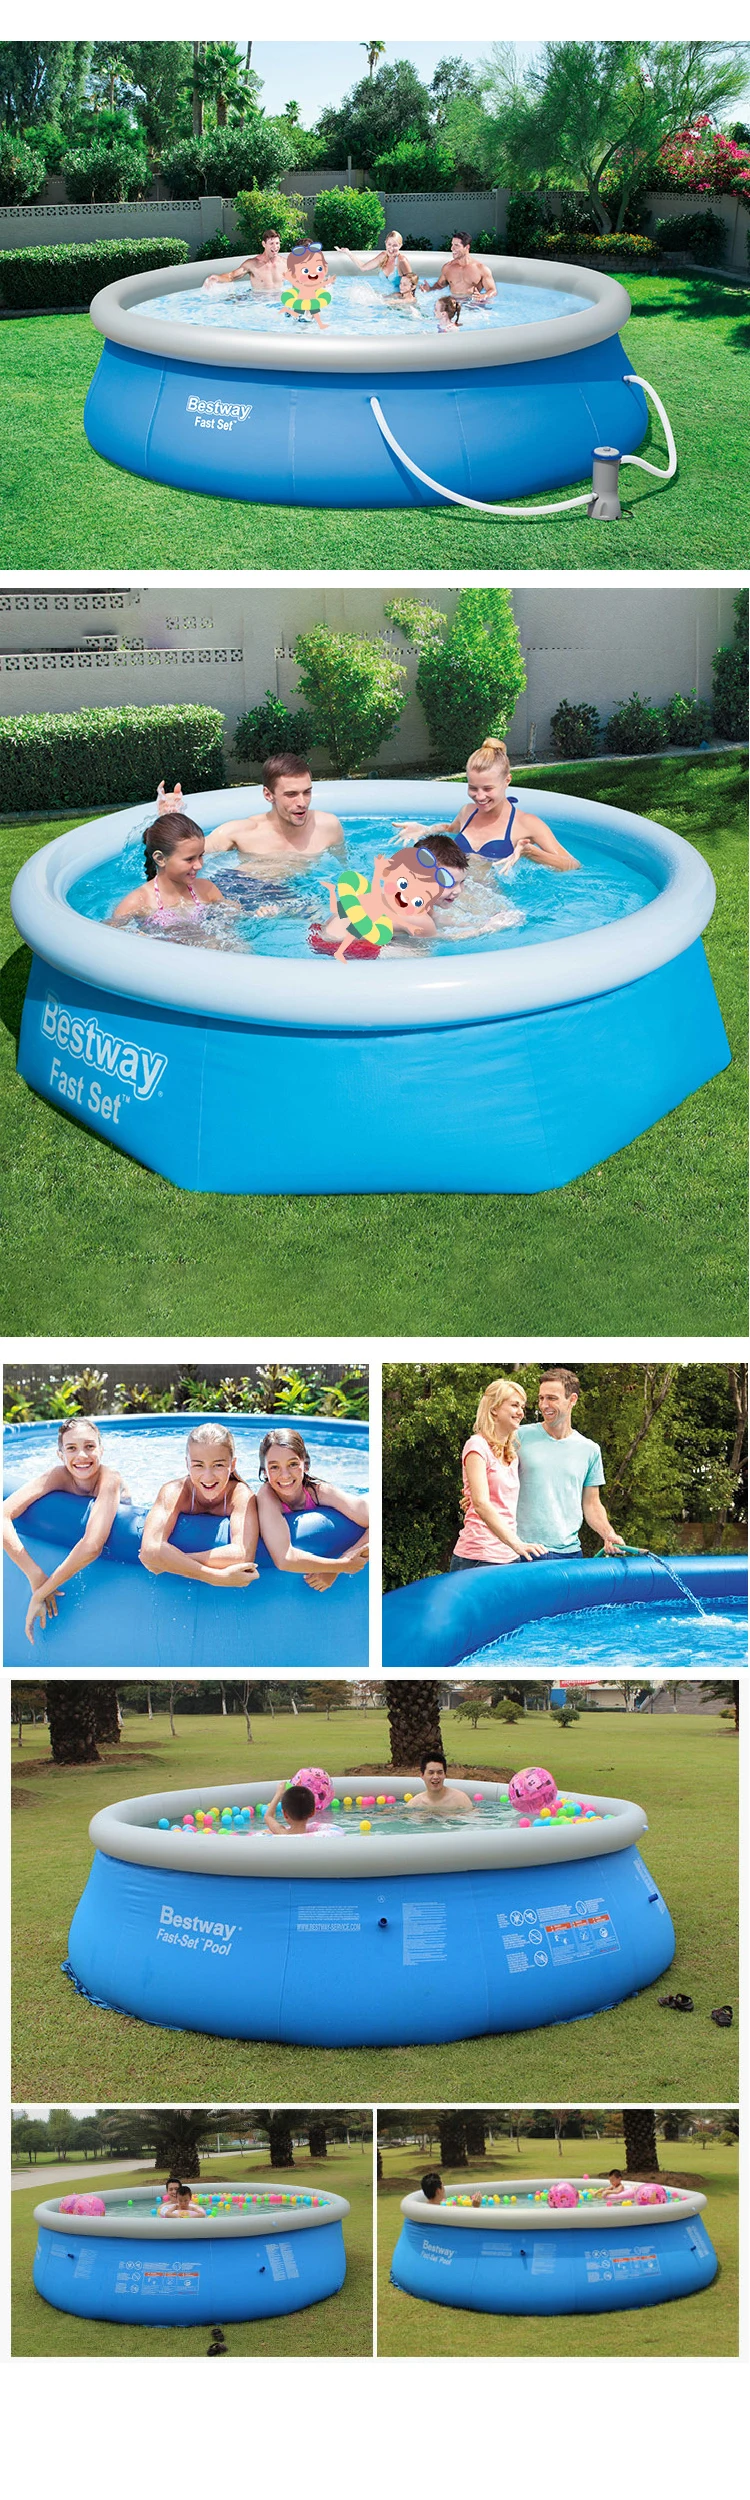 Bestway 57273 12x30 366m X 76cm Inflatable Above Ground Outdoor Portable Swimming Pools